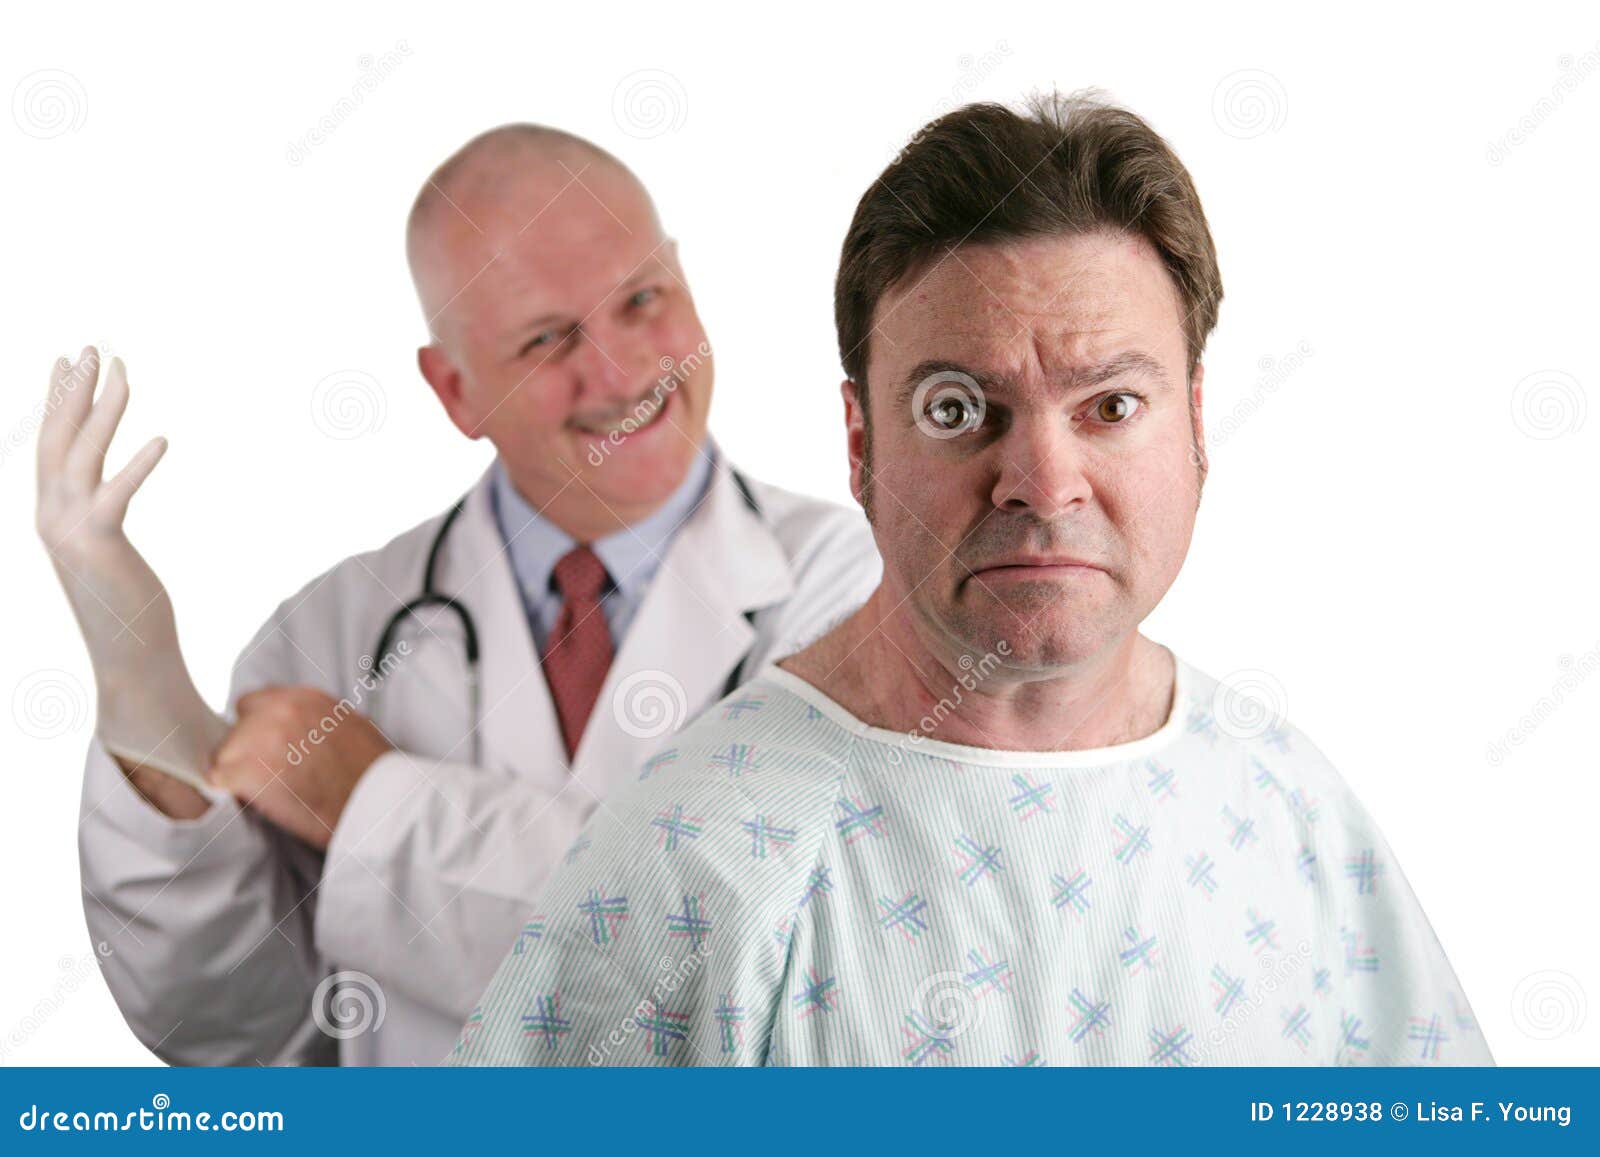 First Prostate Exam stock photo. Image of fear, care, funny - 1228938